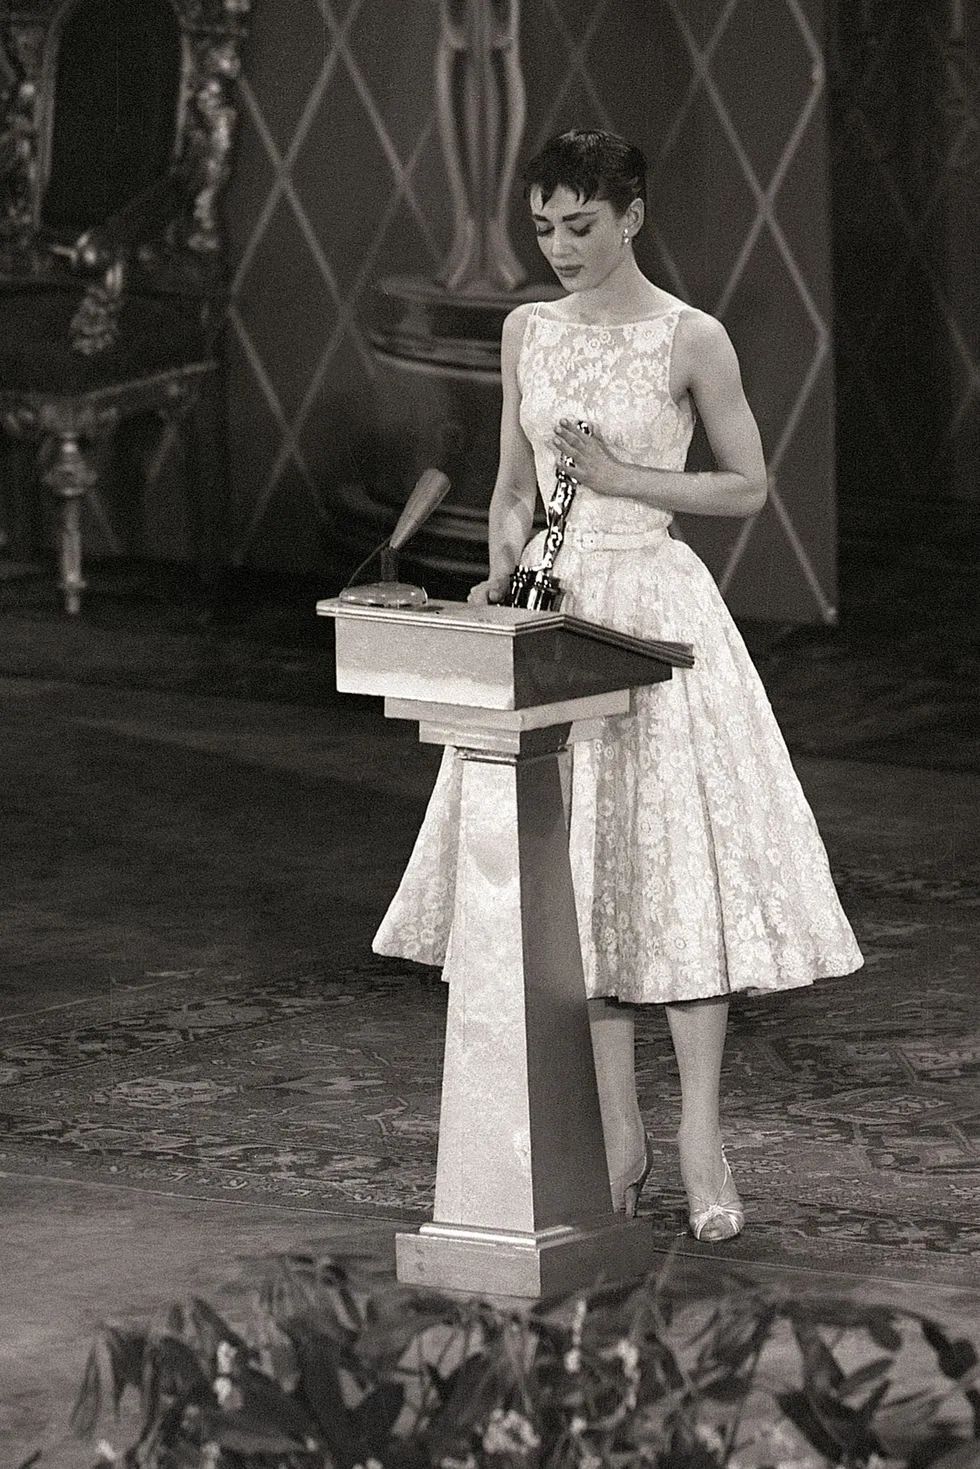 Audrey Hepburn in Givenchy for the 26th Academy Awards (1954)